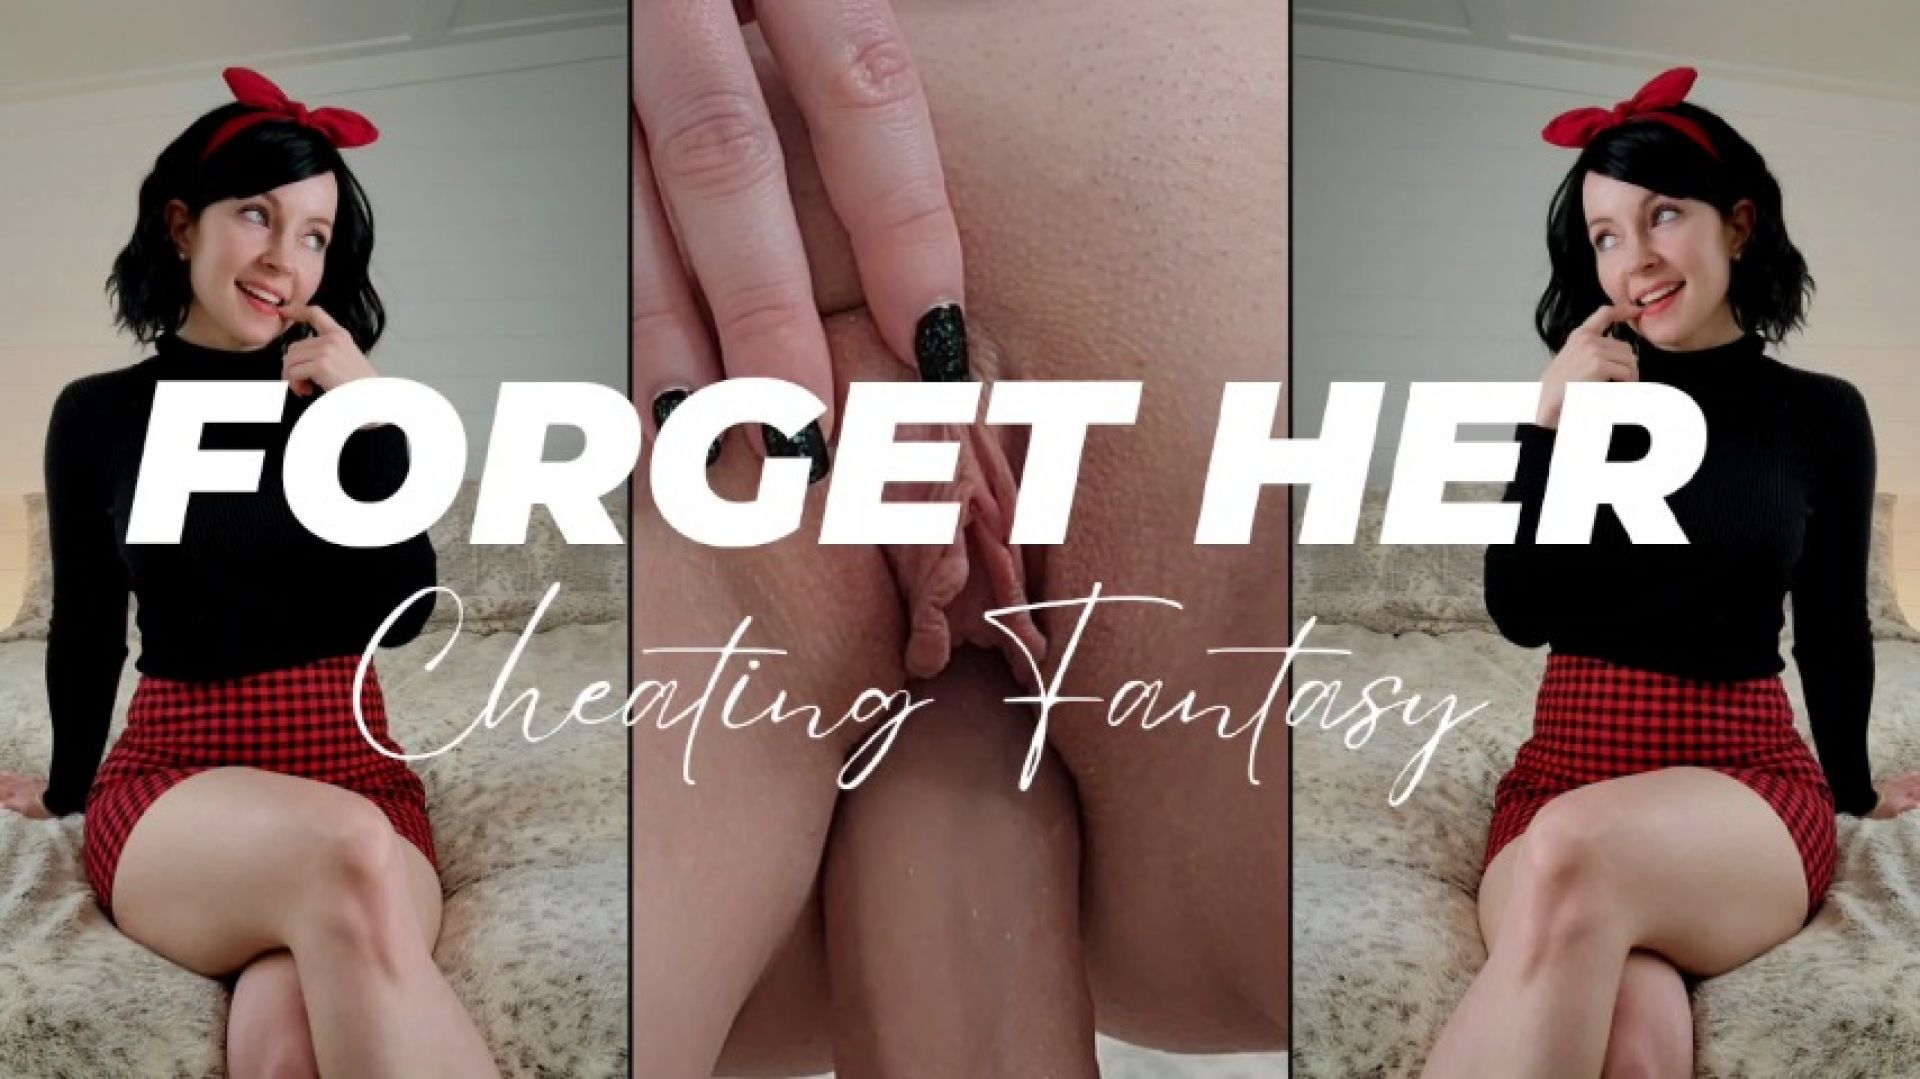 leaked Forget Her - Cheating Fantasy video thumbnail